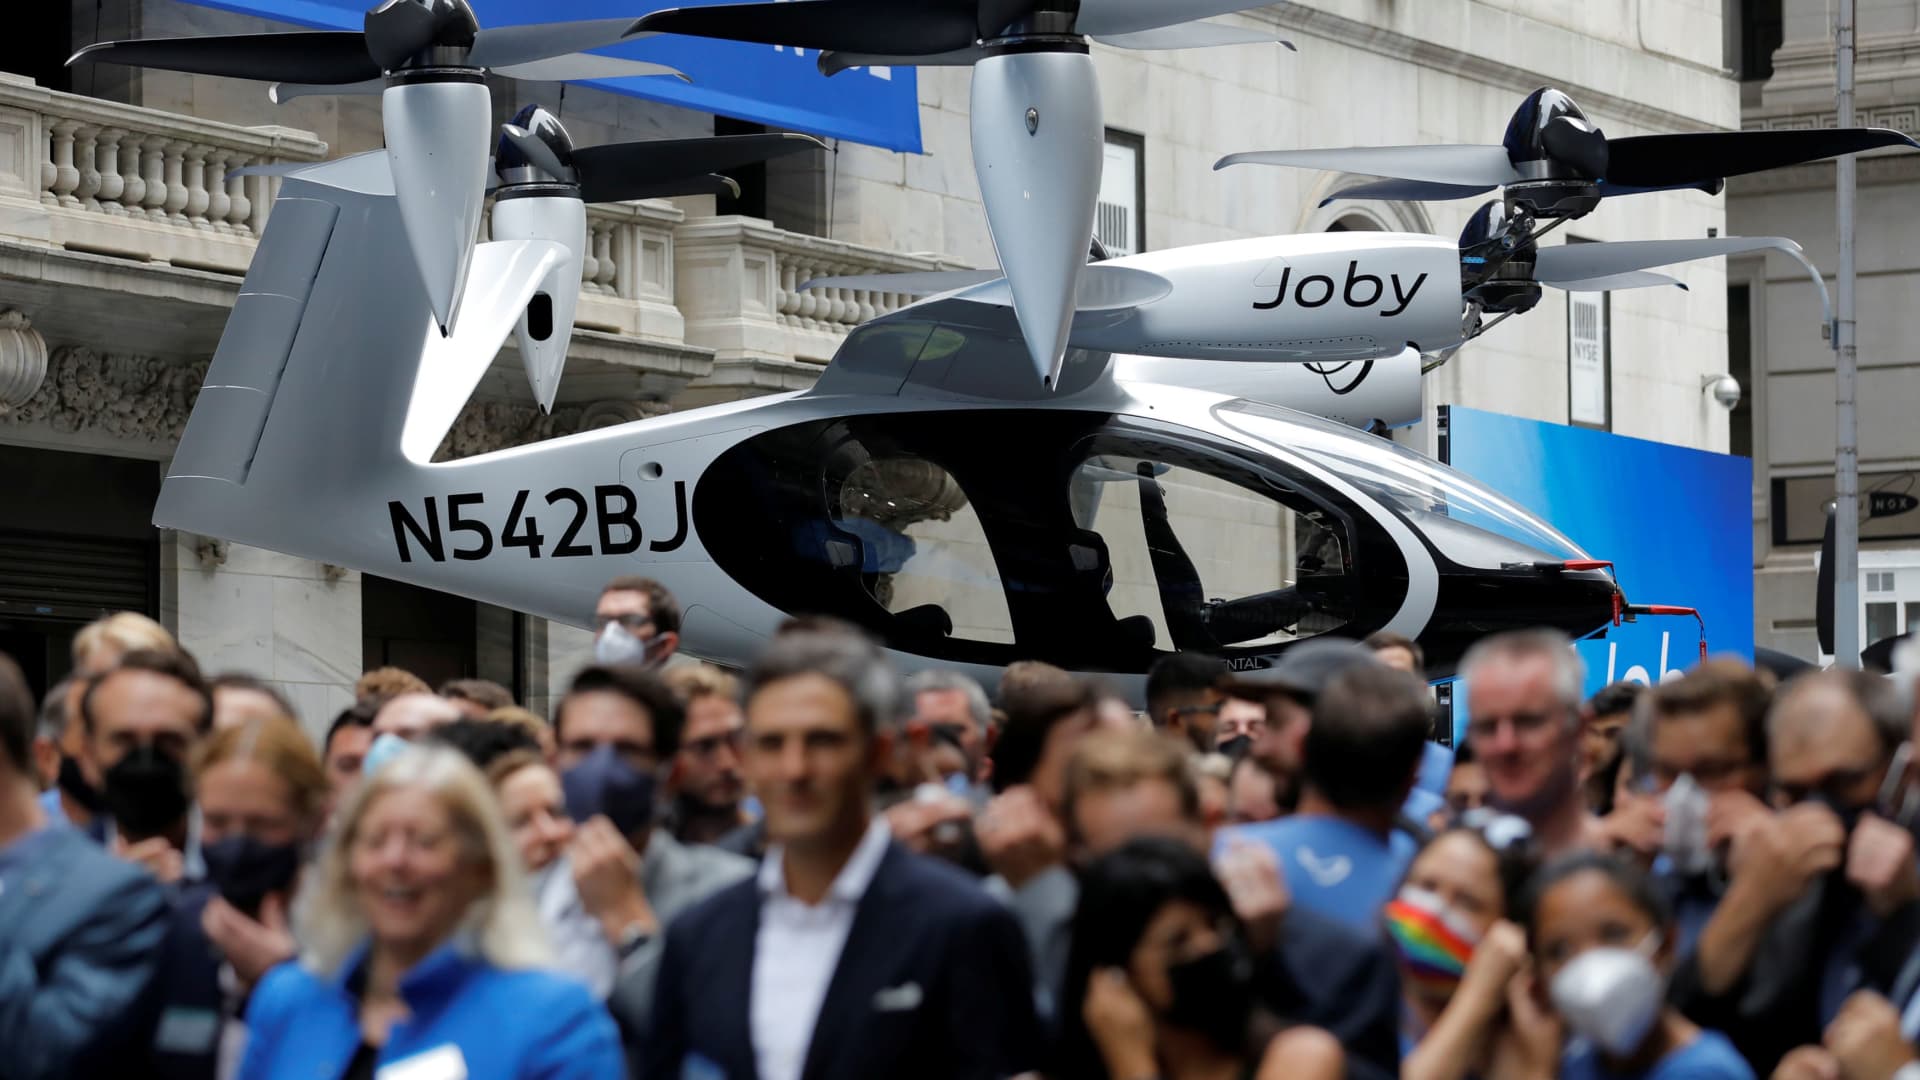 Joby Aviation can’t hit production targets on time, according to short sellers’ report